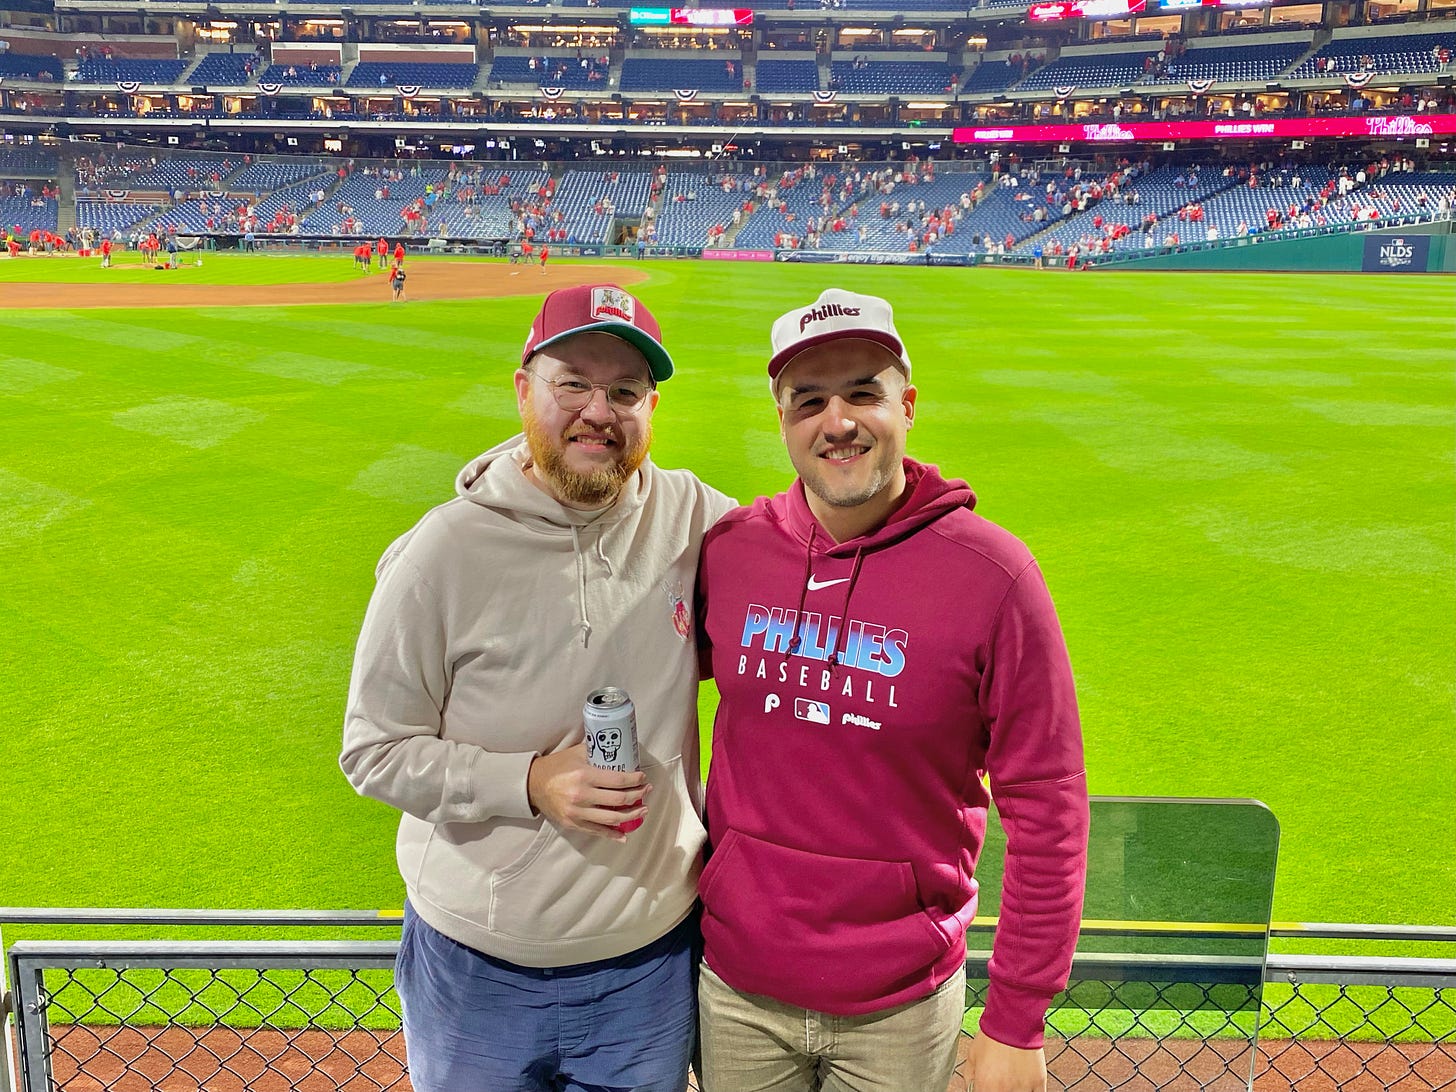 Miles and me, 2022 National League Division Series Game 3, Philadelphia, PA.